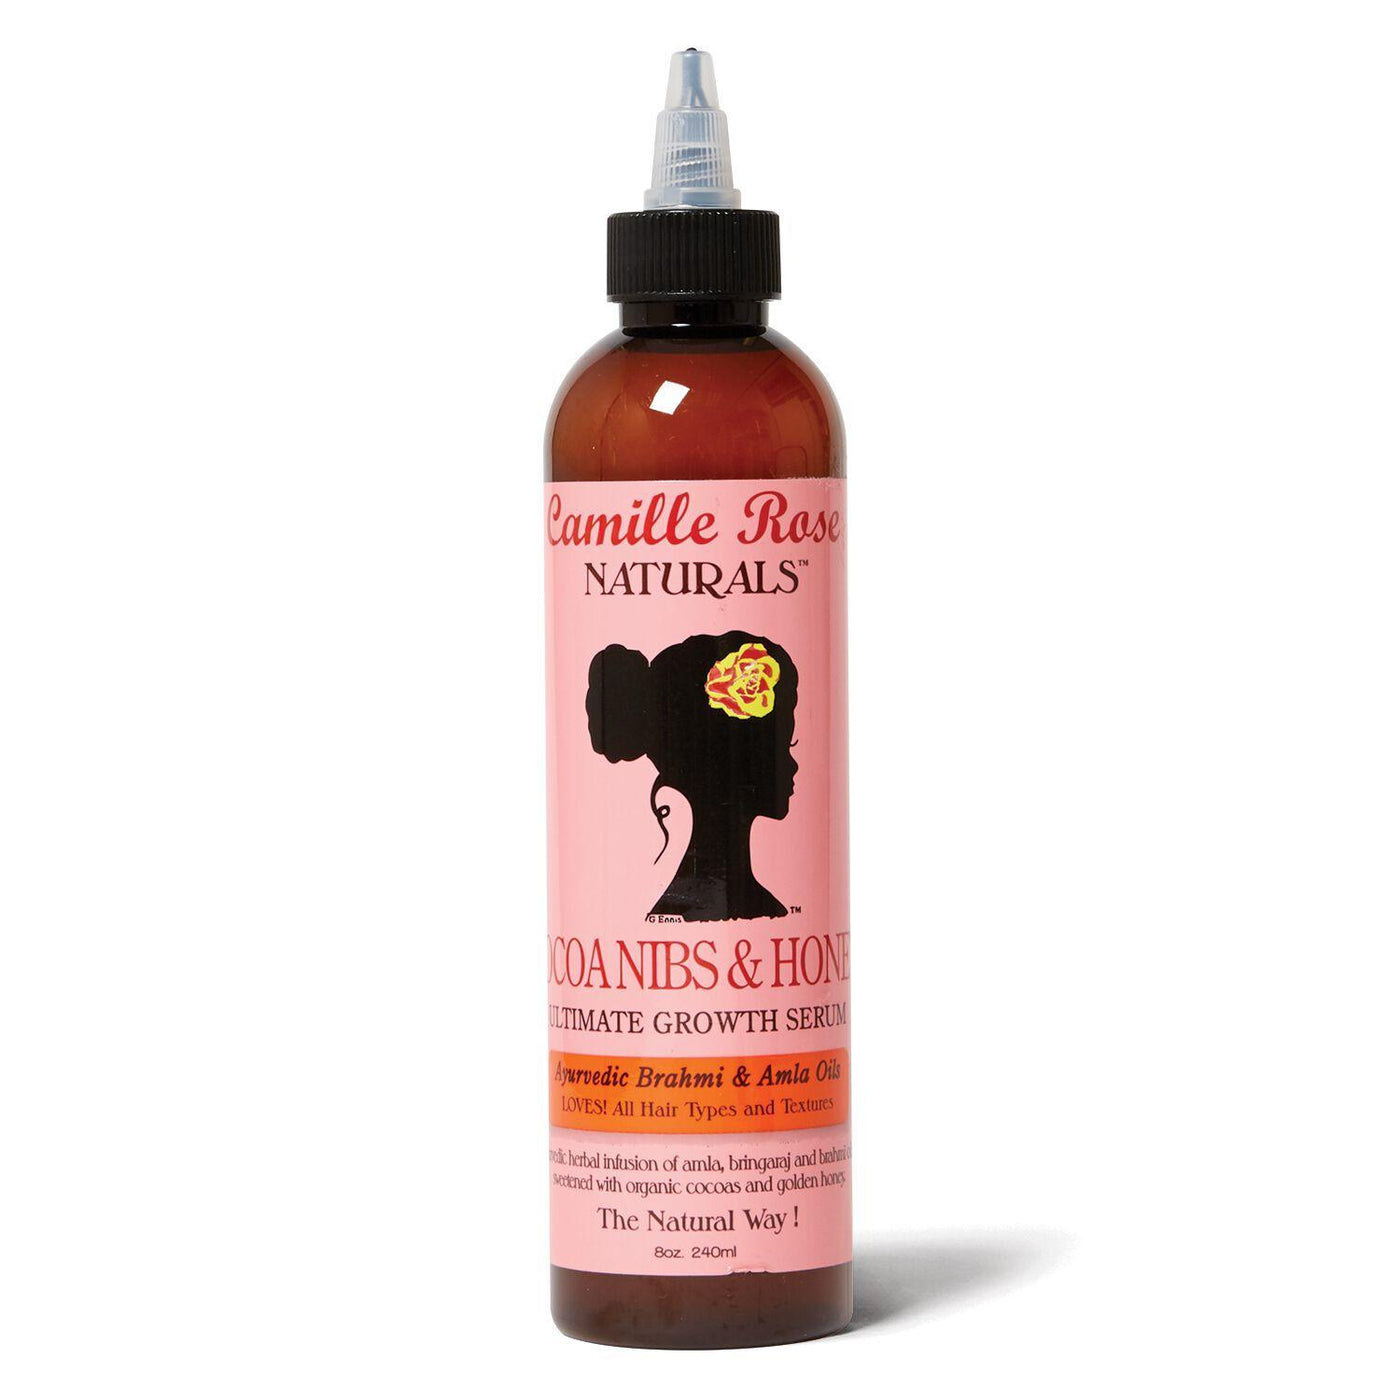 Camille Rose Naturals Cocoa Nibs & Honey Ultimate Strength Serum (8 oz)